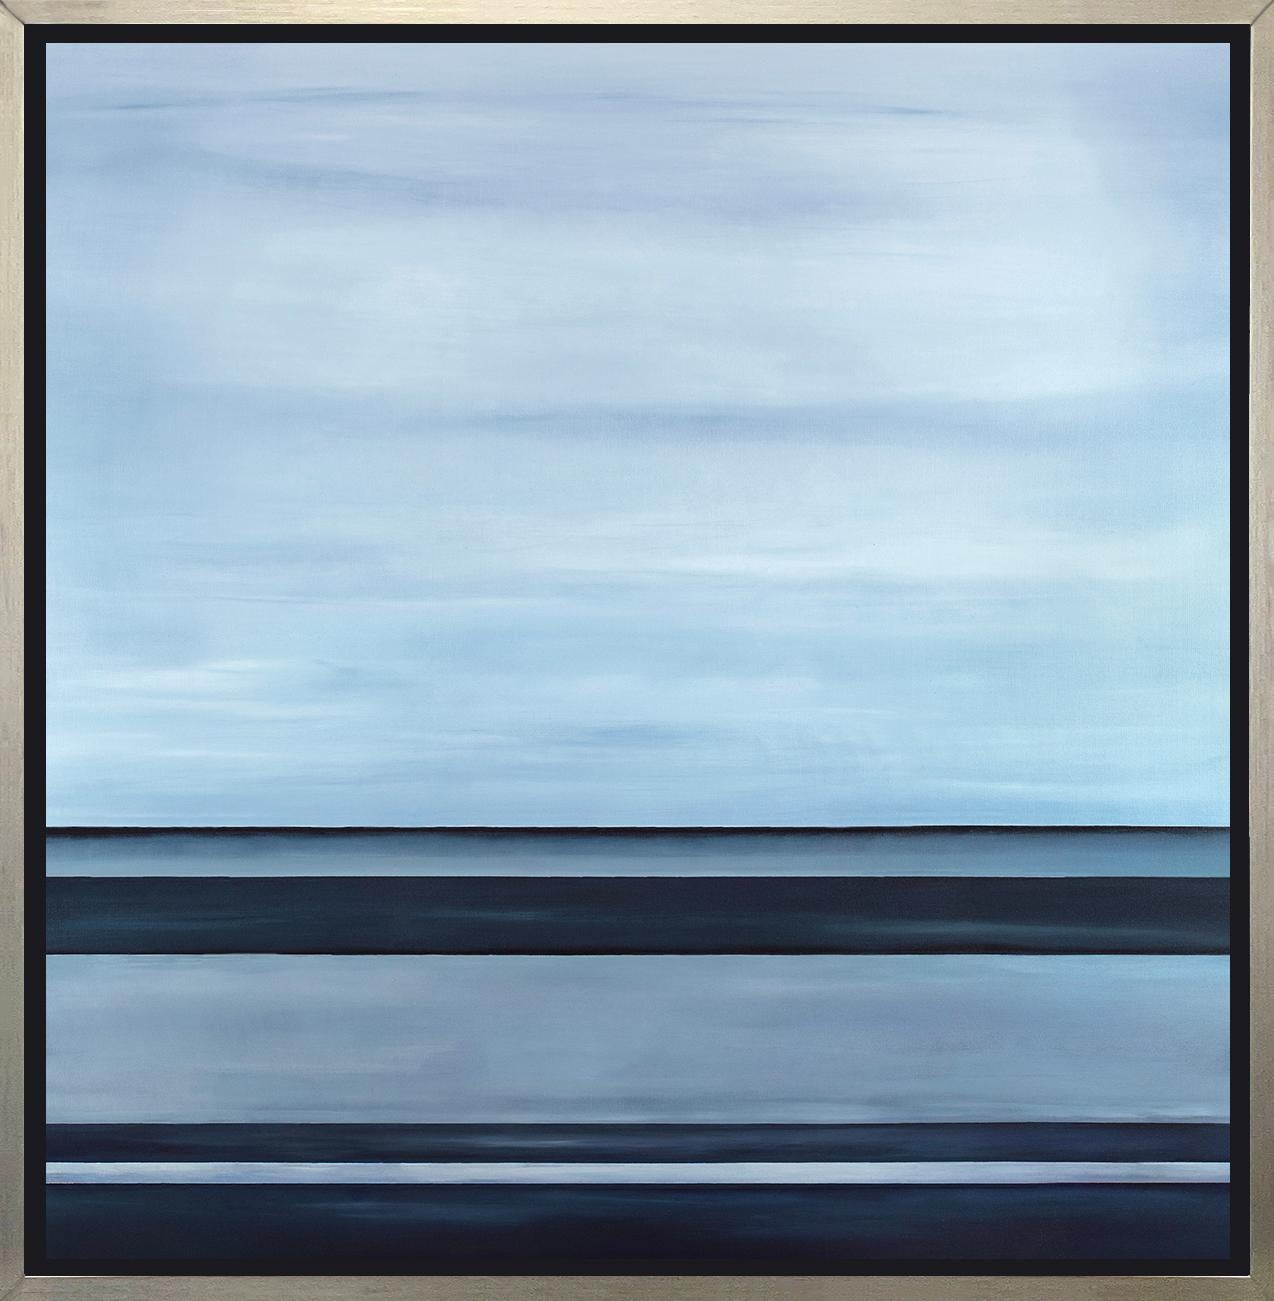 Tony Iadicicco Abstract Print - "Lost at Sea, " Framed Limited Edition Giclee Print, 36" x 36"